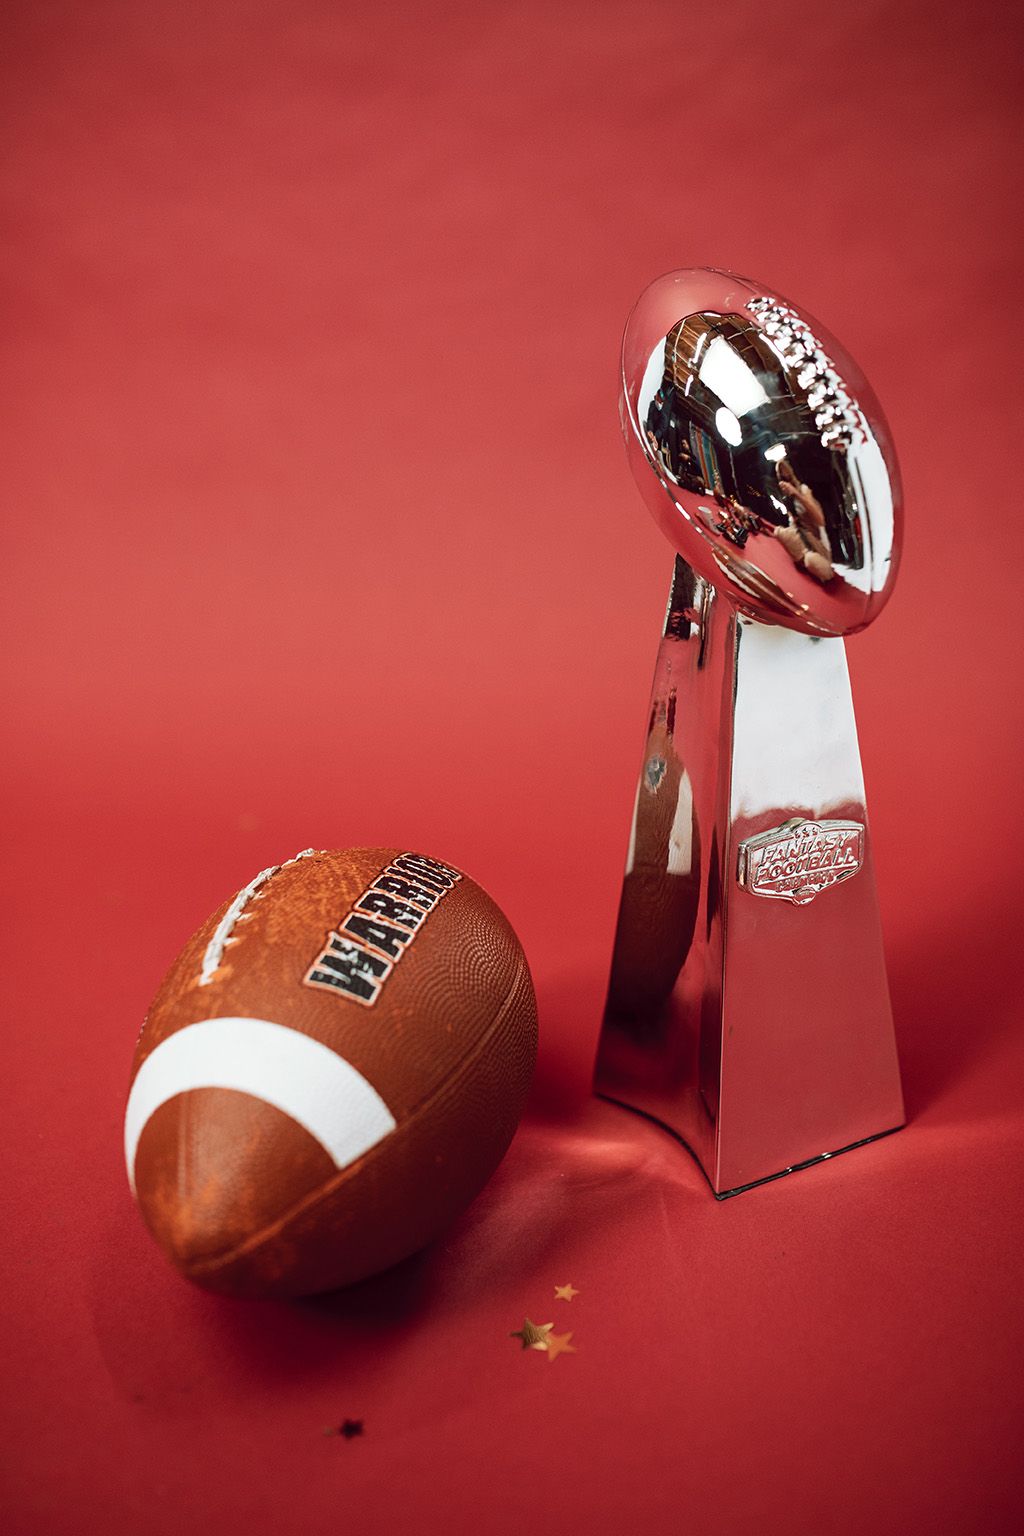 Miniature Lombardi trophy and football.